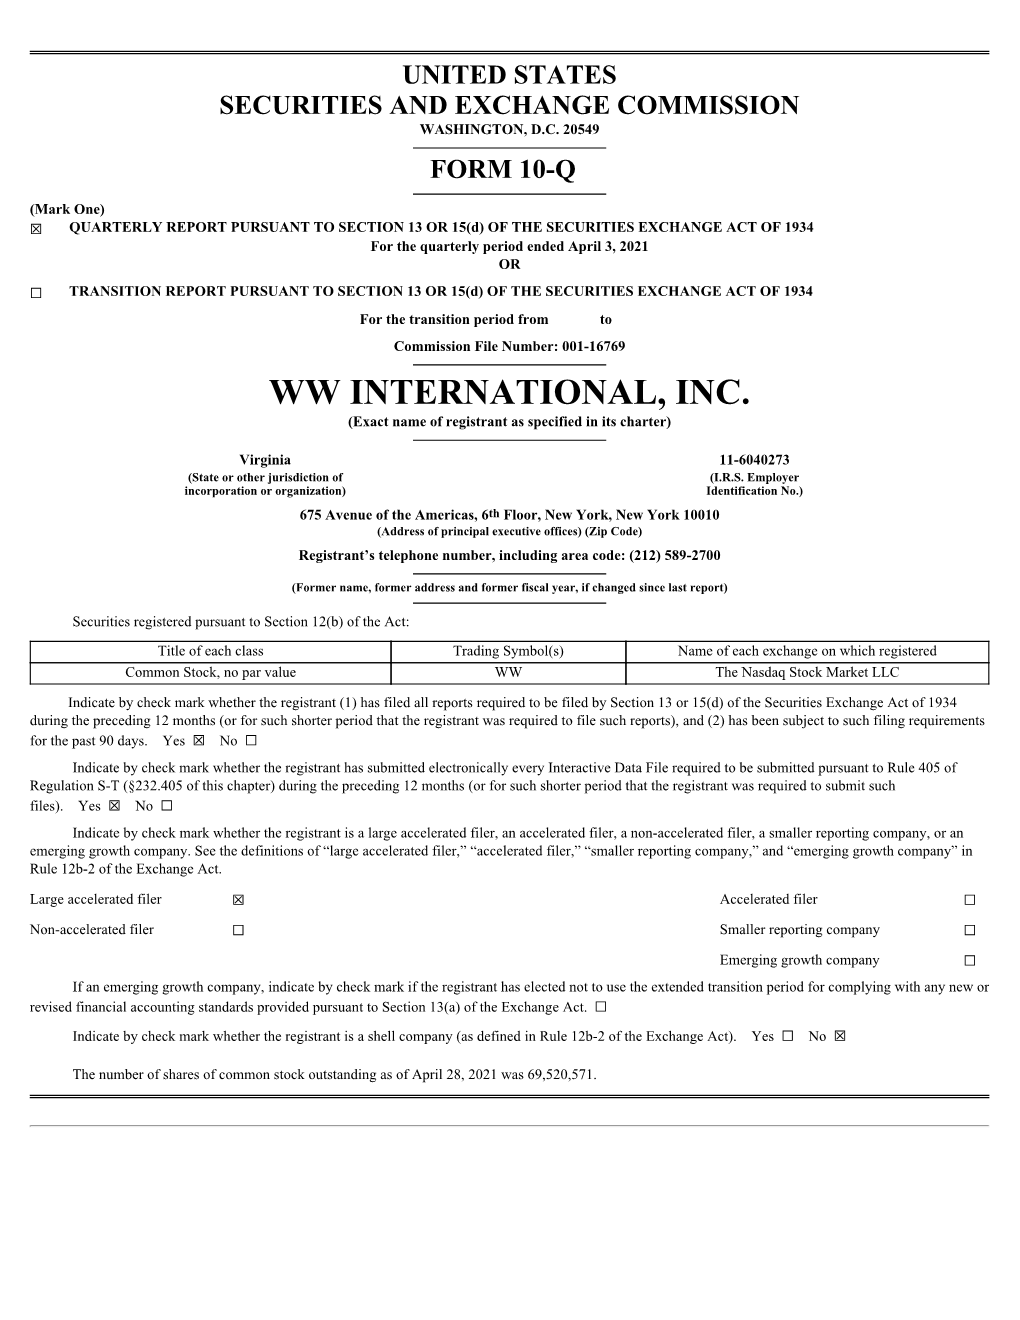 WW INTERNATIONAL, INC. (Exact Name of Registrant As Specified in Its Charter)